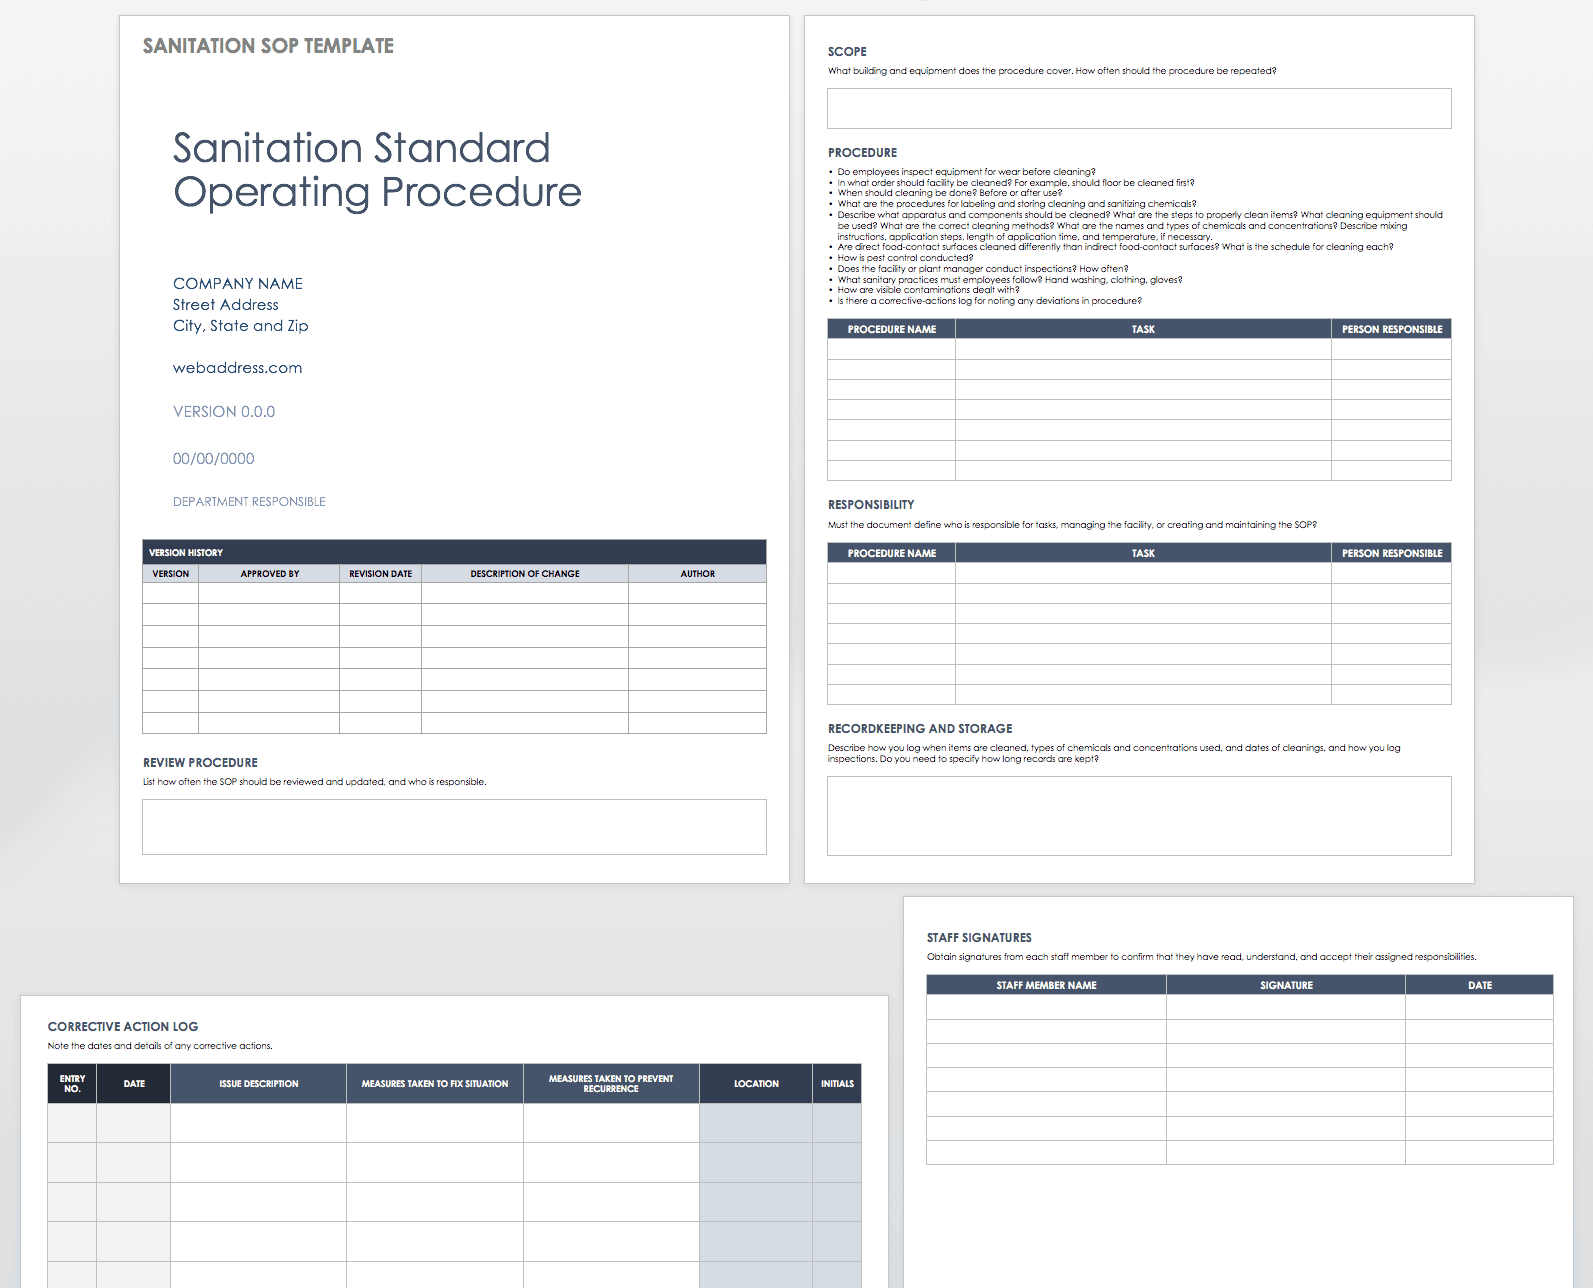 Help Center - How do I include initials in document templates?